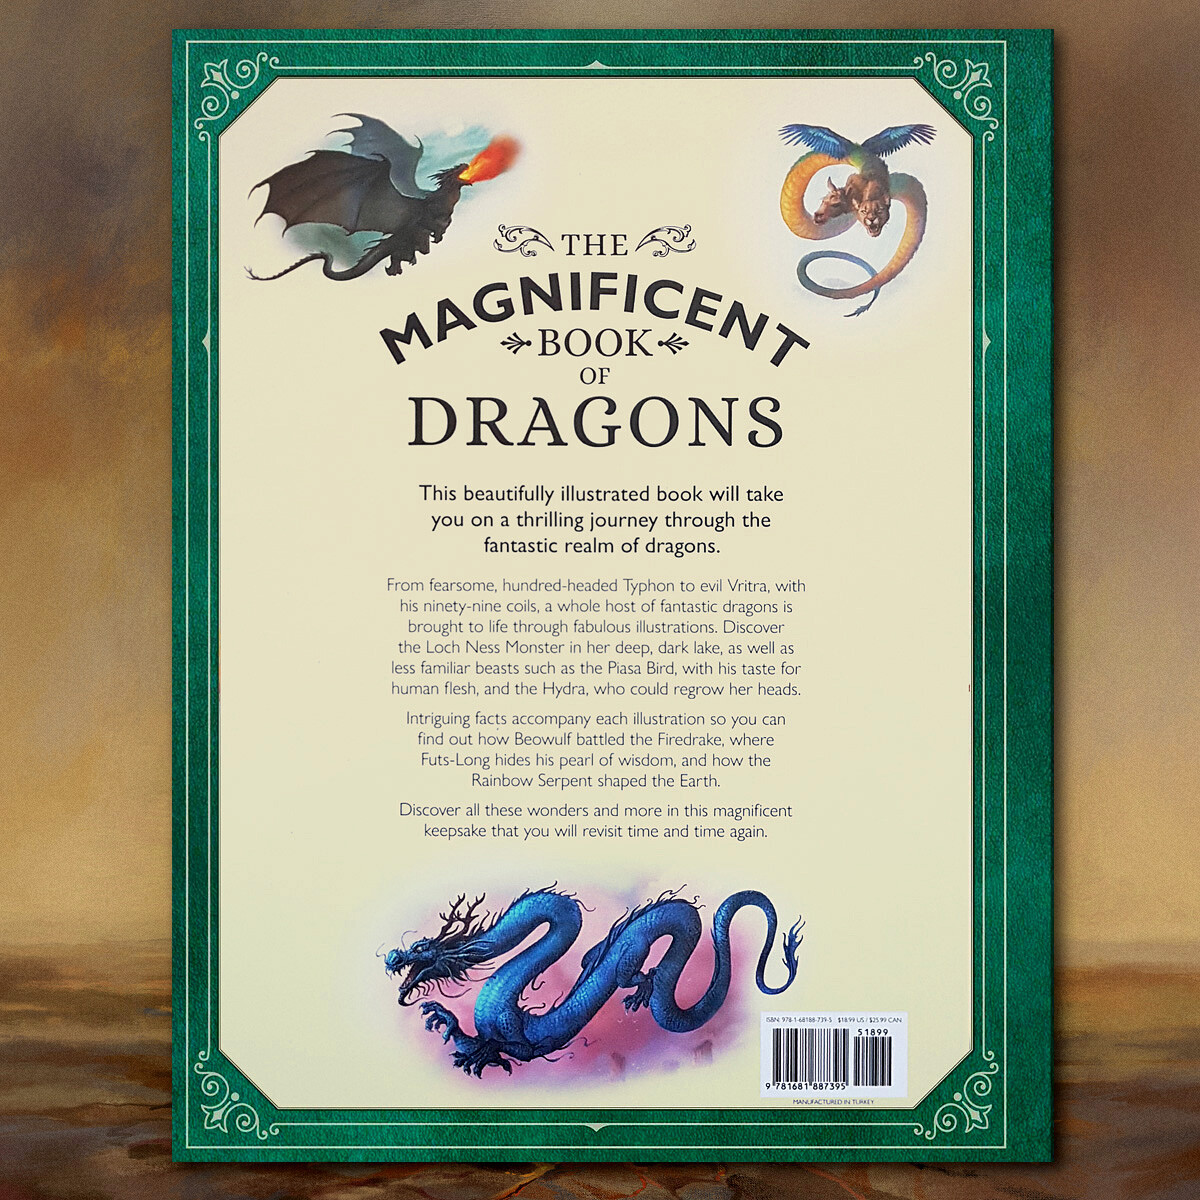 The Magnificent Book of Dragons by Caldwell, Stella